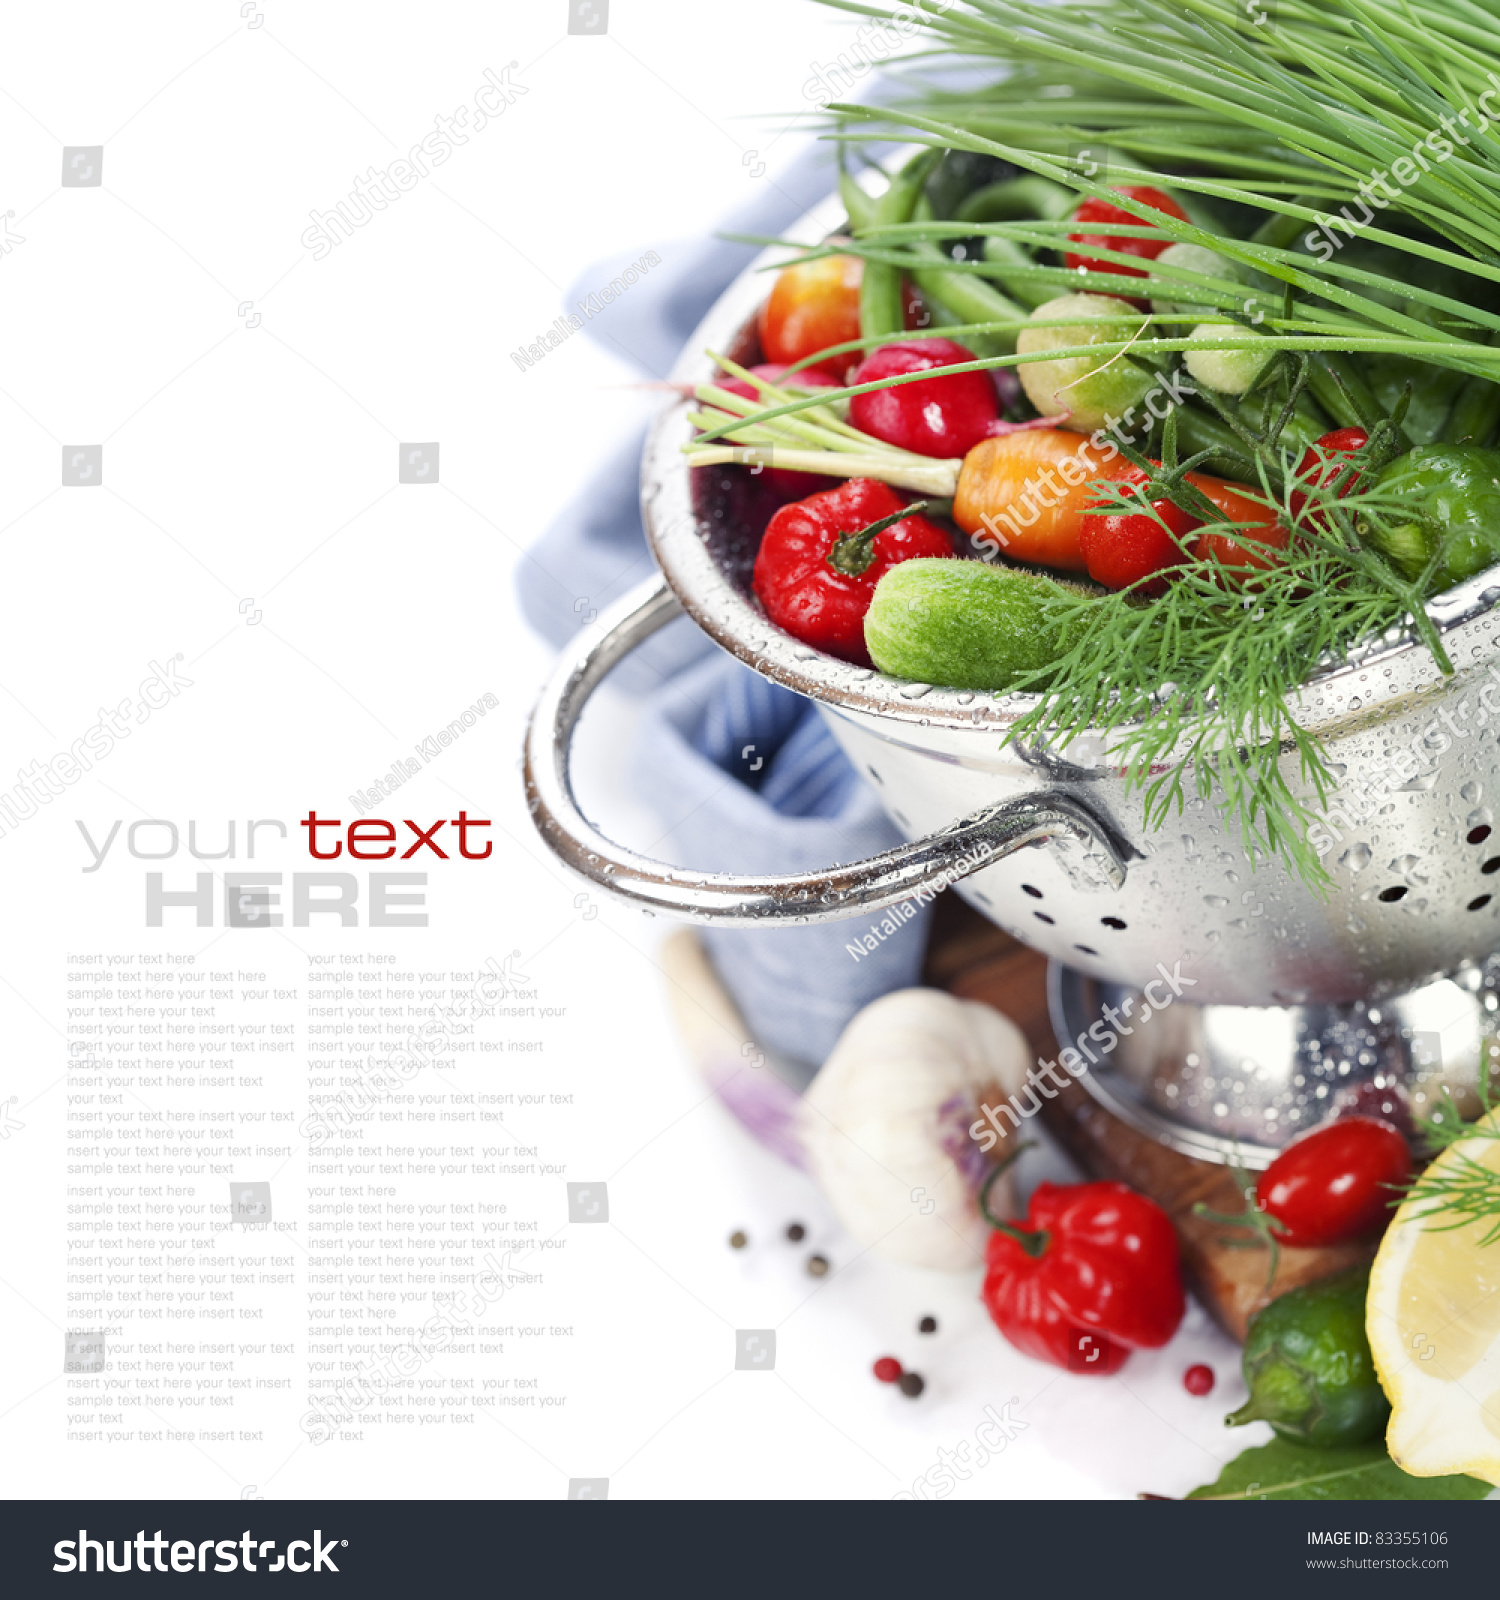 Fresh vegetables in metal colander over white (with sample text) #83355106